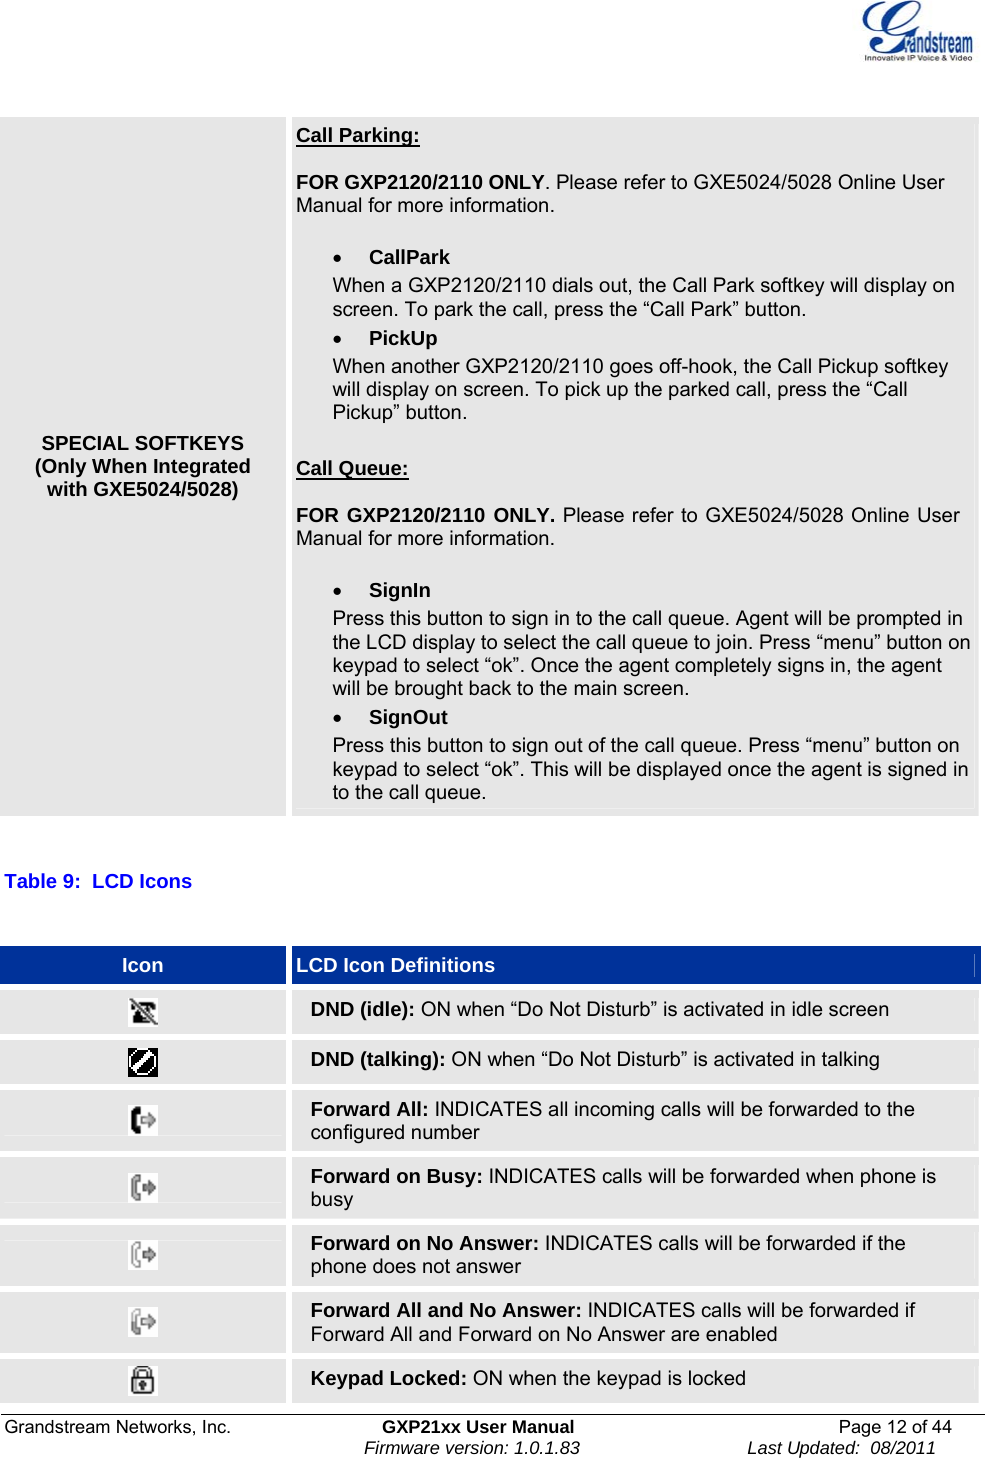  Grandstream Networks, Inc.  GXP21xx User Manual  Page 12 of 44                                                                Firmware version: 1.0.1.83                                 Last Updated:  08/2011  SPECIAL SOFTKEYS (Only When Integrated with GXE5024/5028) Call Parking:    FOR GXP2120/2110 ONLY. Please refer to GXE5024/5028 Online User Manual for more information.  • CallPark    When a GXP2120/2110 dials out, the Call Park softkey will display on screen. To park the call, press the “Call Park” button.  • PickUp      When another GXP2120/2110 goes off-hook, the Call Pickup softkey will display on screen. To pick up the parked call, press the “Call Pickup” button.   Call Queue:    FOR GXP2120/2110 ONLY. Please refer to GXE5024/5028 Online User Manual for more information.  • SignIn    Press this button to sign in to the call queue. Agent will be prompted in the LCD display to select the call queue to join. Press “menu” button on keypad to select “ok”. Once the agent completely signs in, the agent will be brought back to the main screen. • SignOut      Press this button to sign out of the call queue. Press “menu” button on keypad to select “ok”. This will be displayed once the agent is signed in to the call queue.  Table 9:  LCD Icons  Icon  LCD Icon Definitions  DND (idle): ON when “Do Not Disturb” is activated in idle screen  DND (talking): ON when “Do Not Disturb” is activated in talking  Forward All: INDICATES all incoming calls will be forwarded to the configured number  Forward on Busy: INDICATES calls will be forwarded when phone is busy  Forward on No Answer: INDICATES calls will be forwarded if the phone does not answer  Forward All and No Answer: INDICATES calls will be forwarded if Forward All and Forward on No Answer are enabled  Keypad Locked: ON when the keypad is locked 